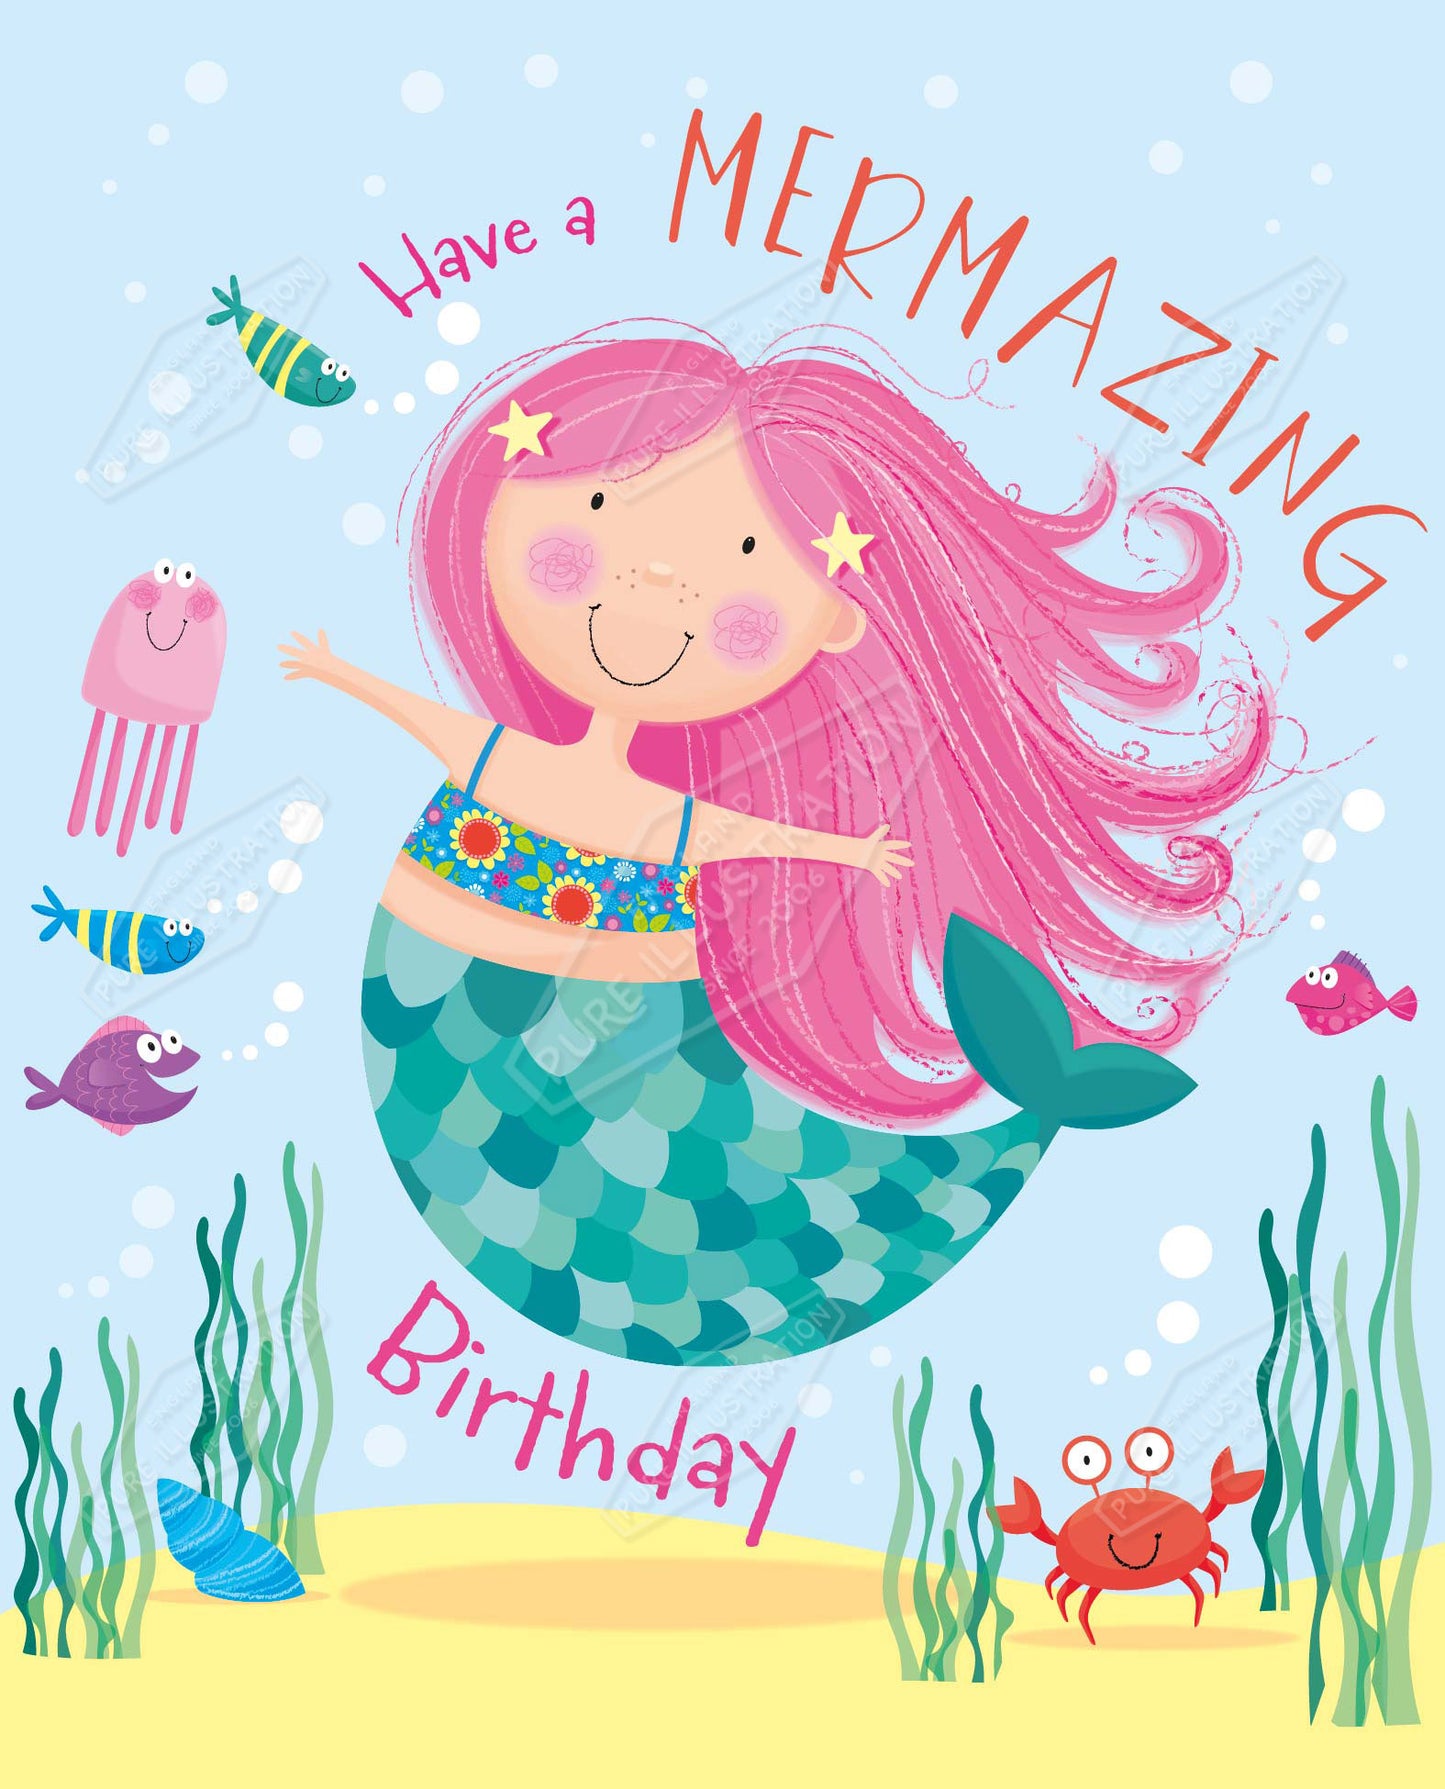 00035193SPI- Sarah Pitt is represented by Pure Art Licensing Agency - Birthday Greeting Card Design